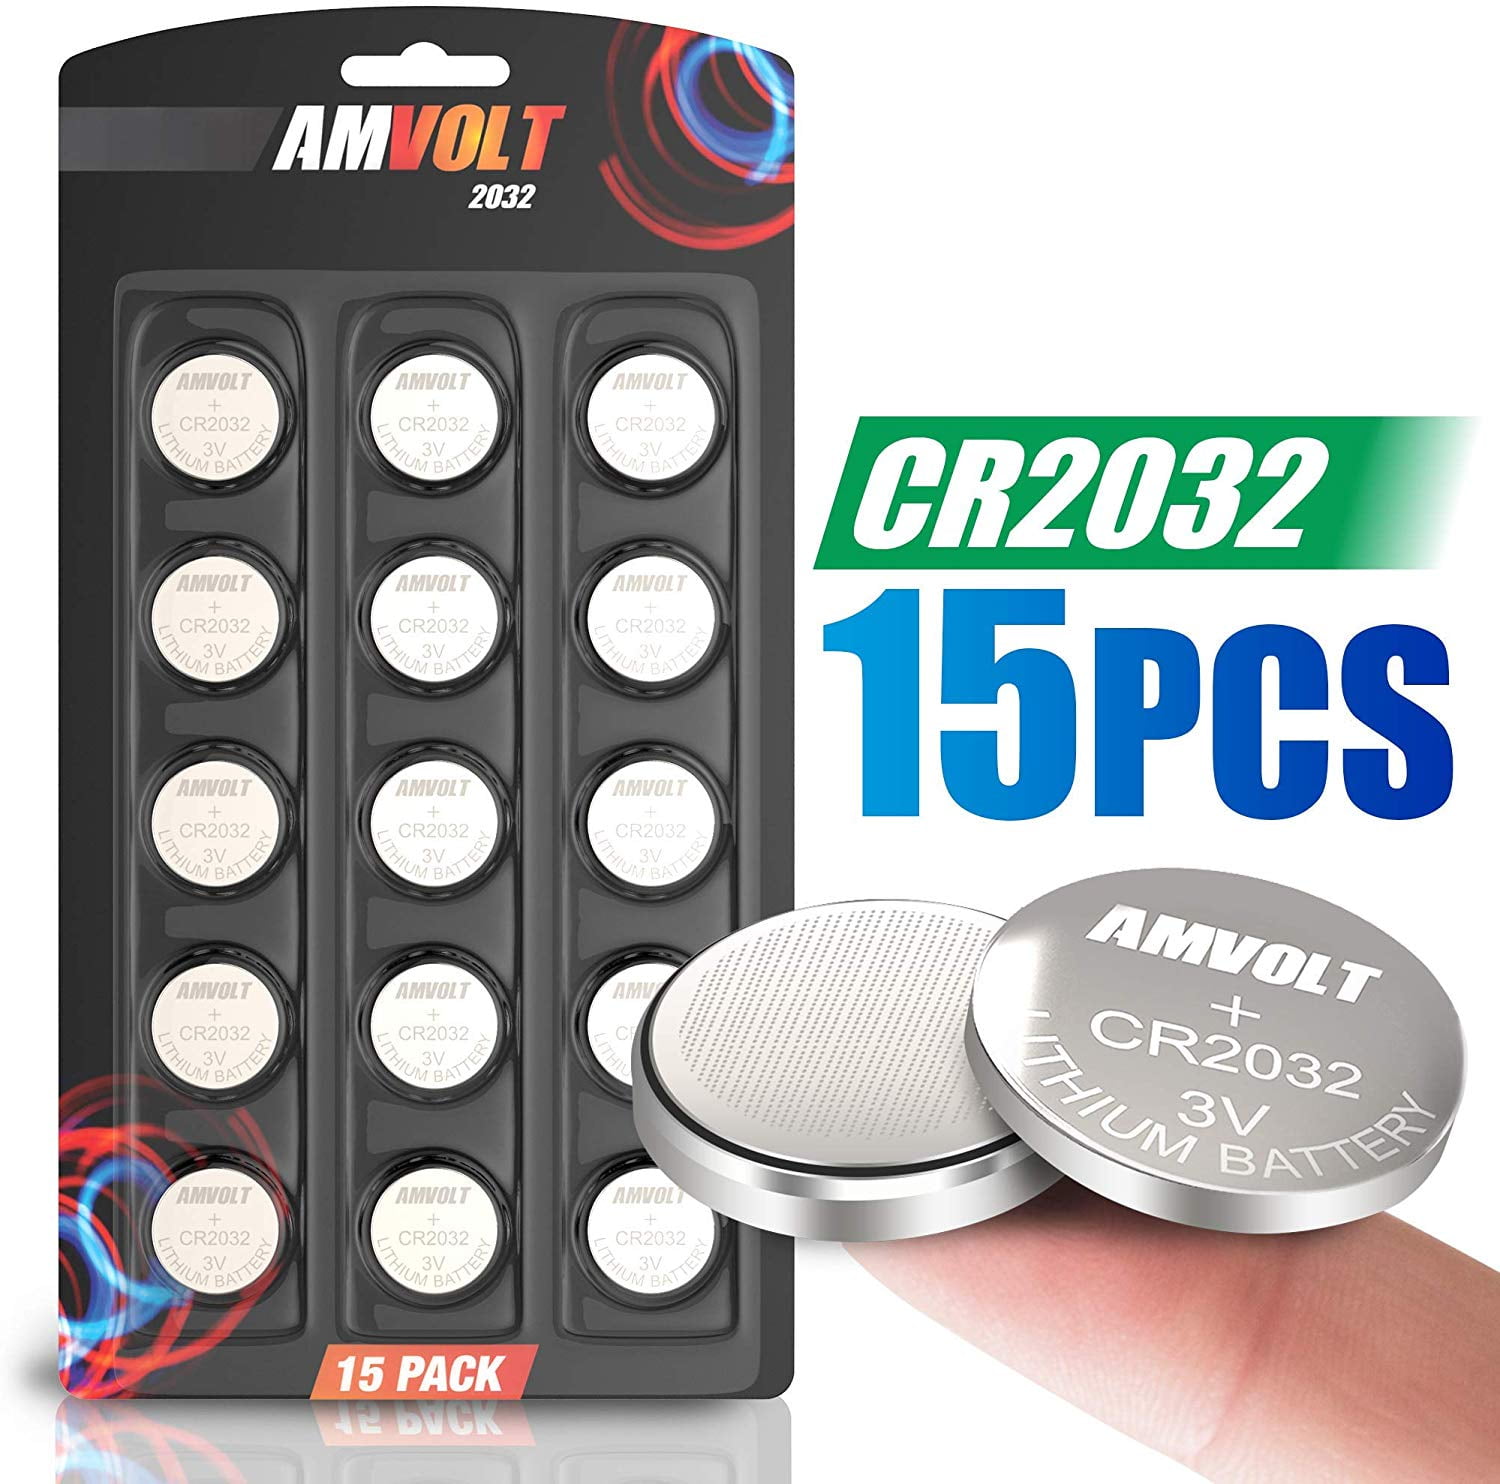 AmVolt 15 Pack CR2032 Battery [Ultra Power] 20MM - Best 3 Volt Lithium  Watch Batteries - 600mAh - 3V CMOS Coin Button Cell - Fob Car Remote Key CR  2032 [Expires 2025] 